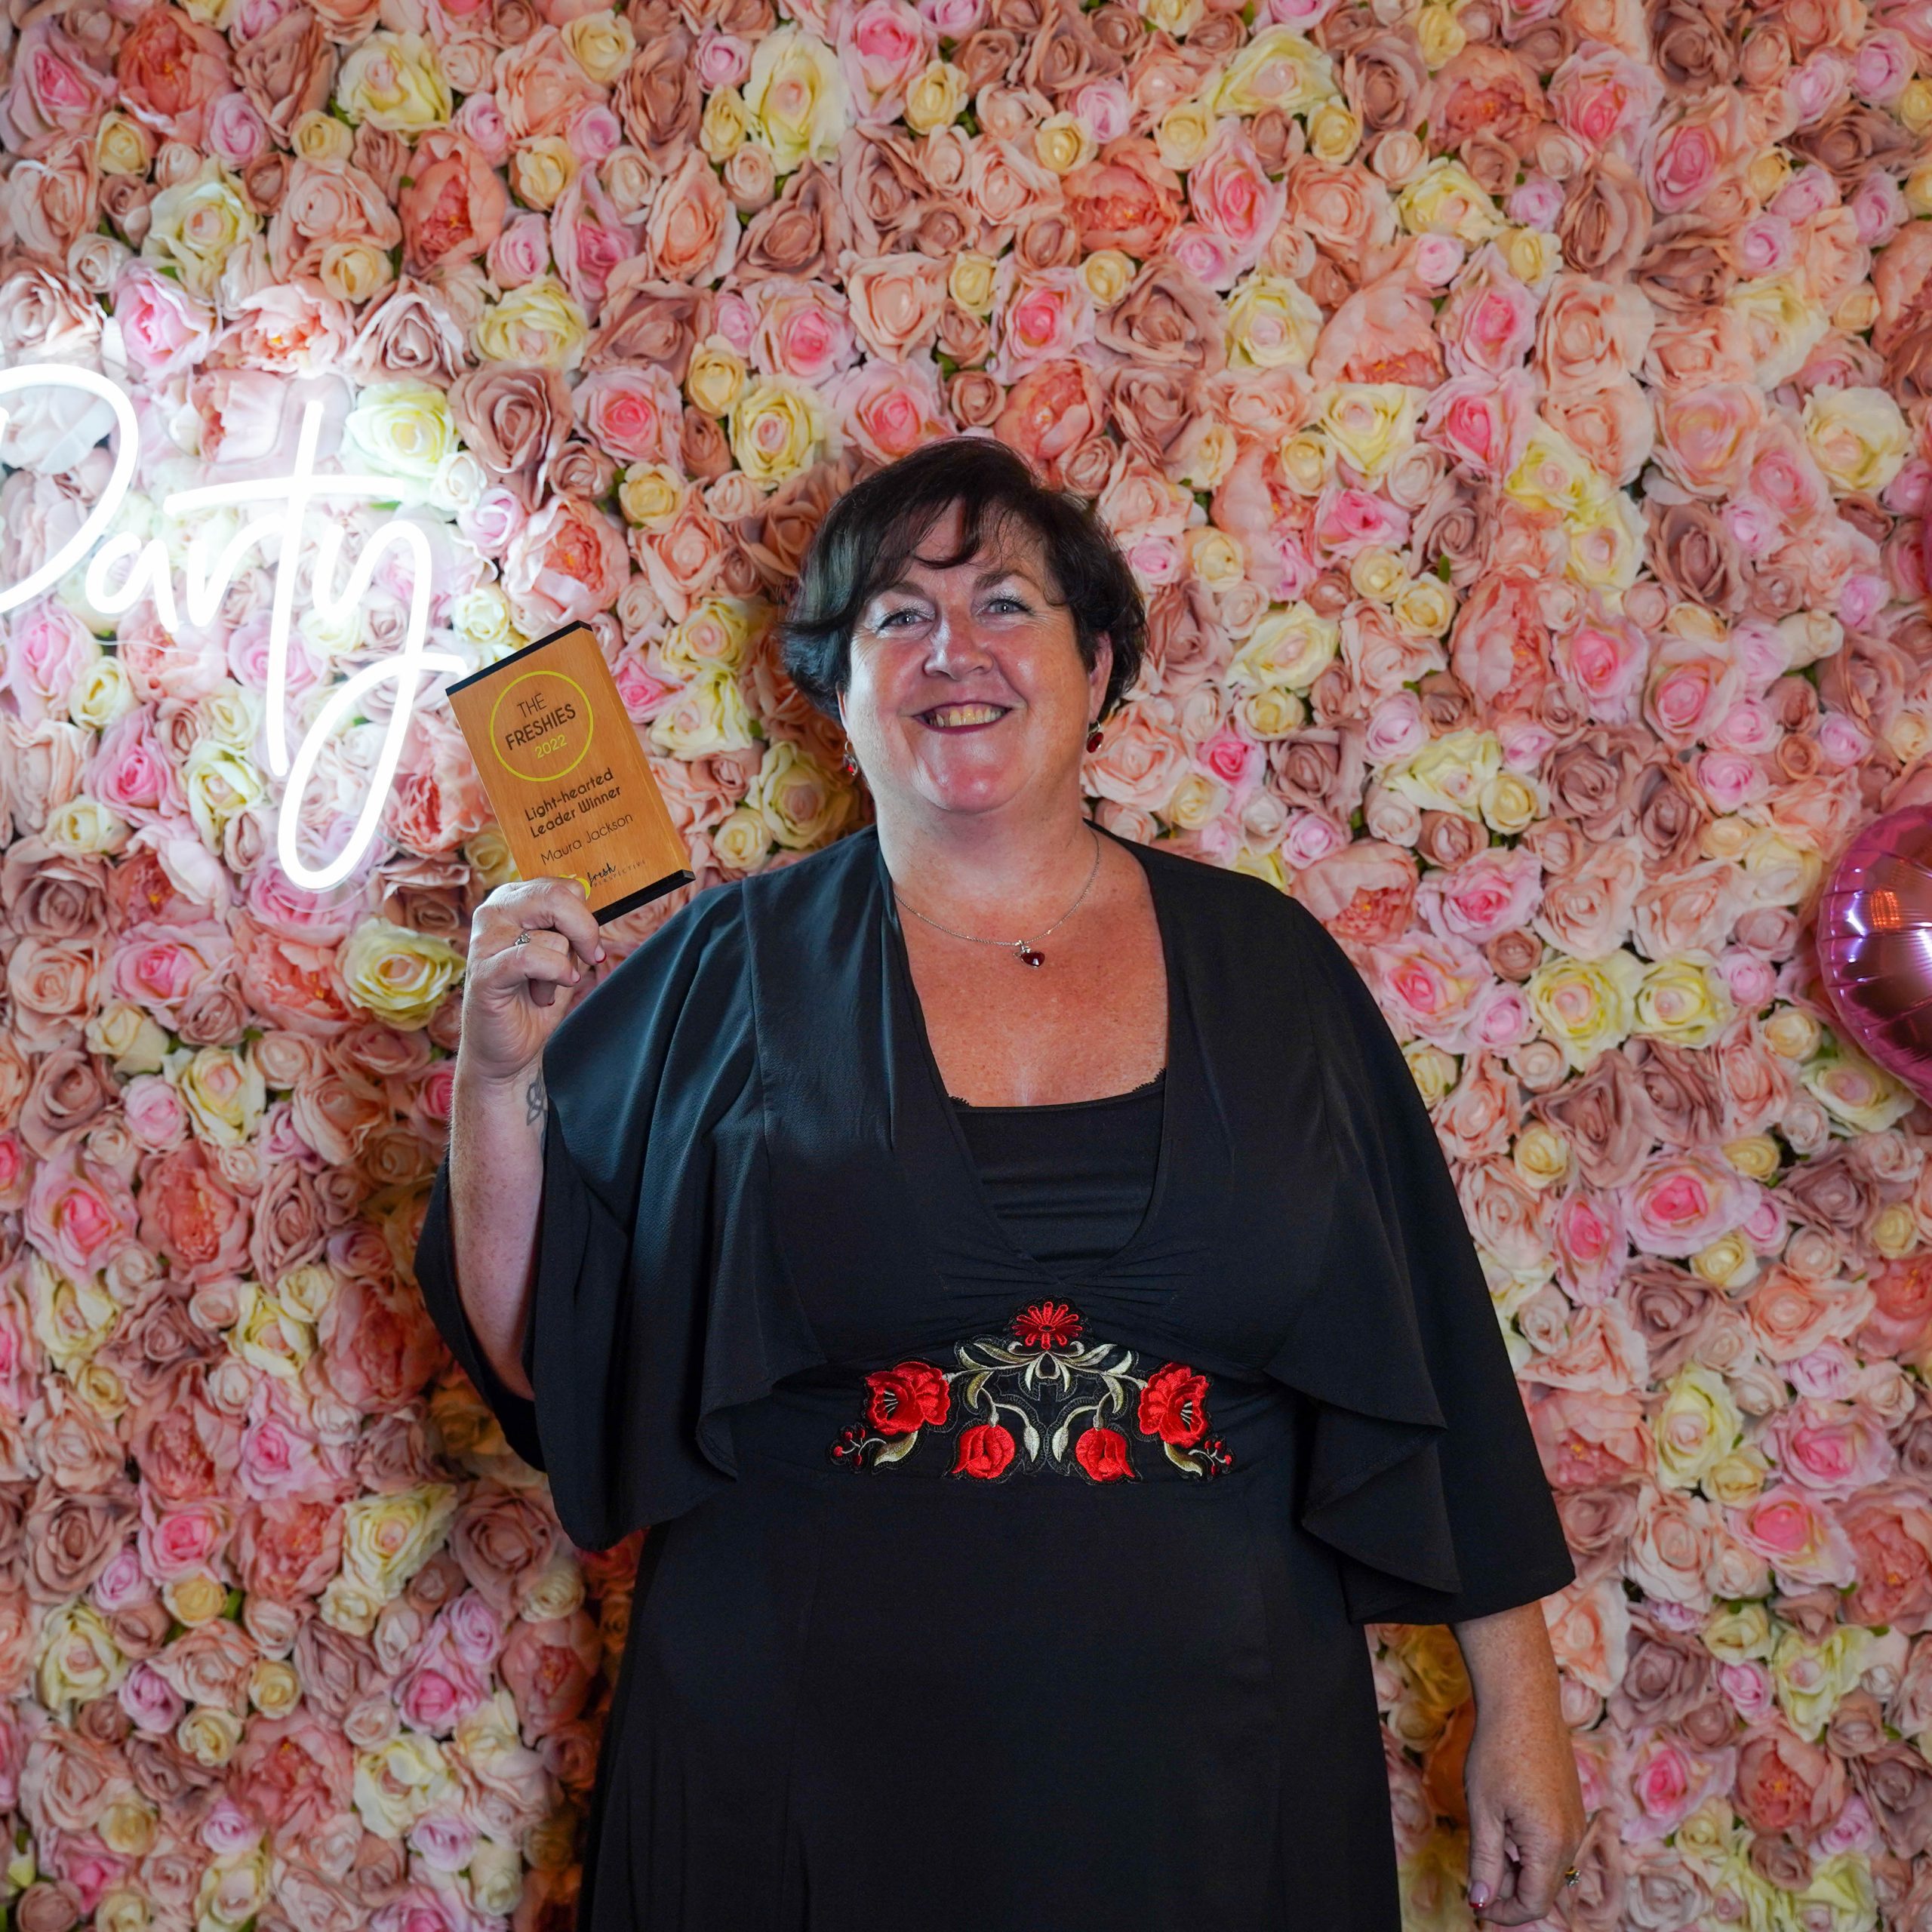 The Freshies 2022 winner for Light-hearted Leader, Maura Jackson stood in front of a pink floral wall, holding her award